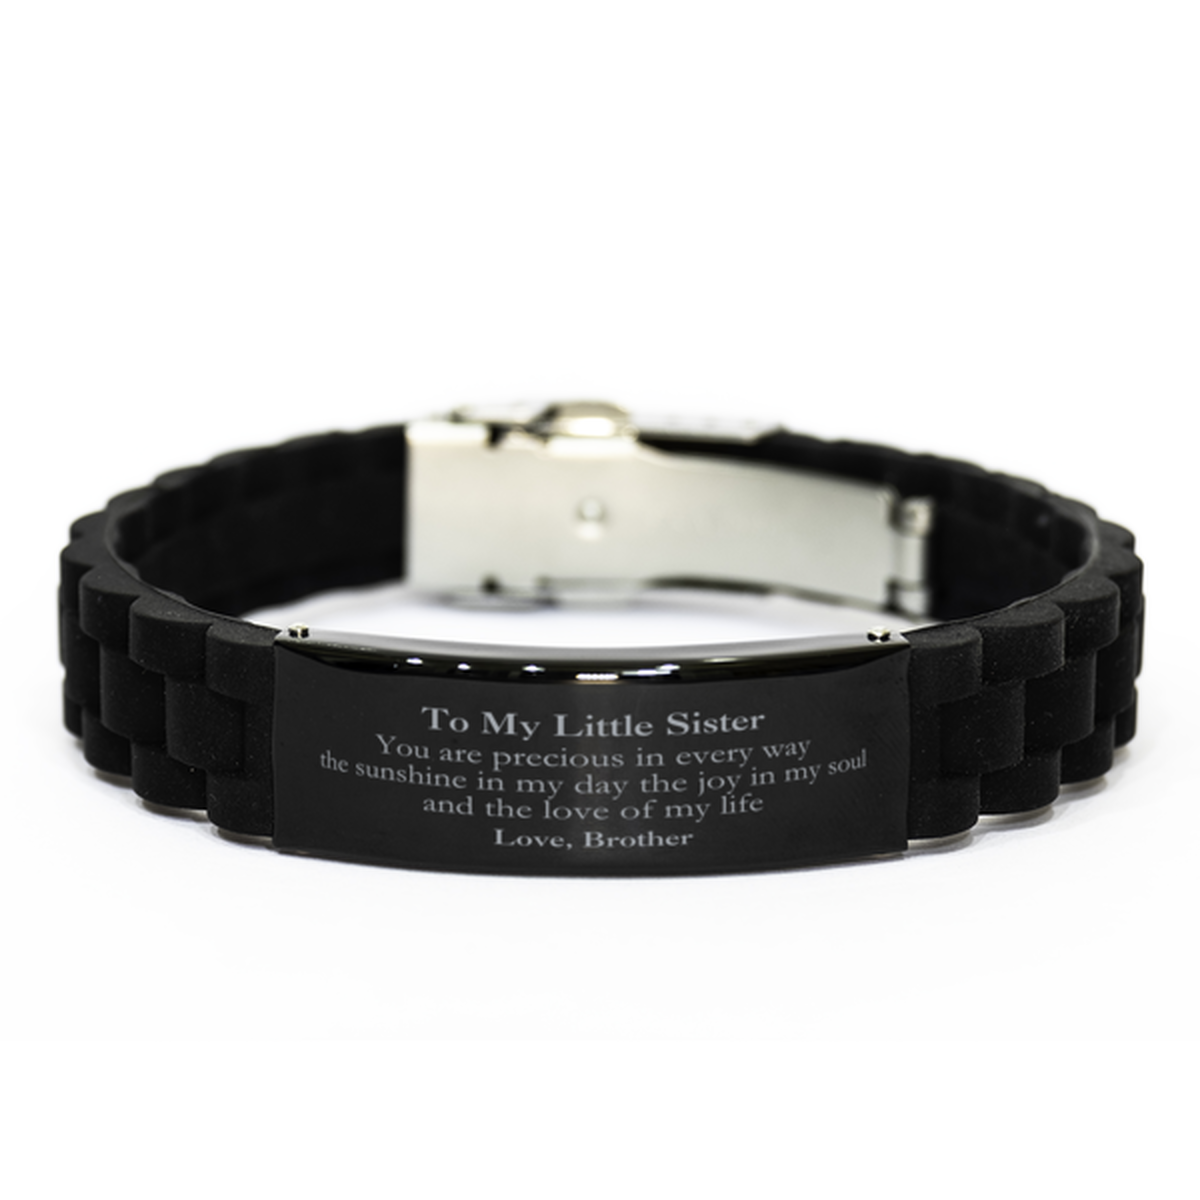 Graduation Gifts for Little Sister Black Glidelock Clasp Bracelet Present from Brother, Christmas Little Sister Birthday Gifts Little Sister You are precious in every way the sunshine in my day. Love, Brother